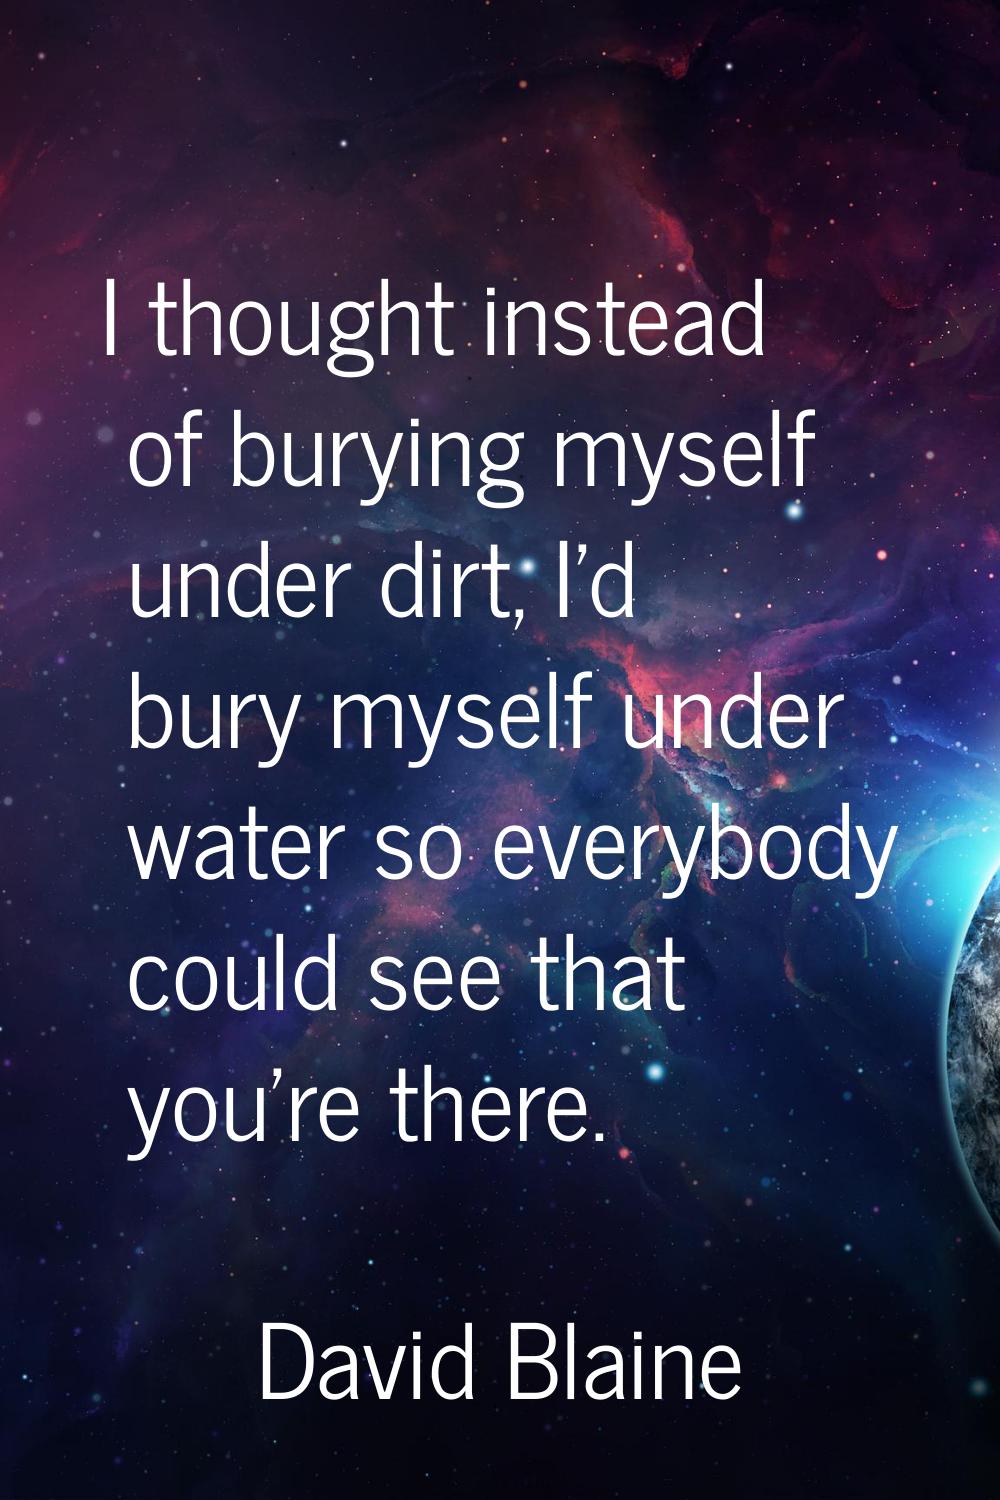 I thought instead of burying myself under dirt, I'd bury myself under water so everybody could see 